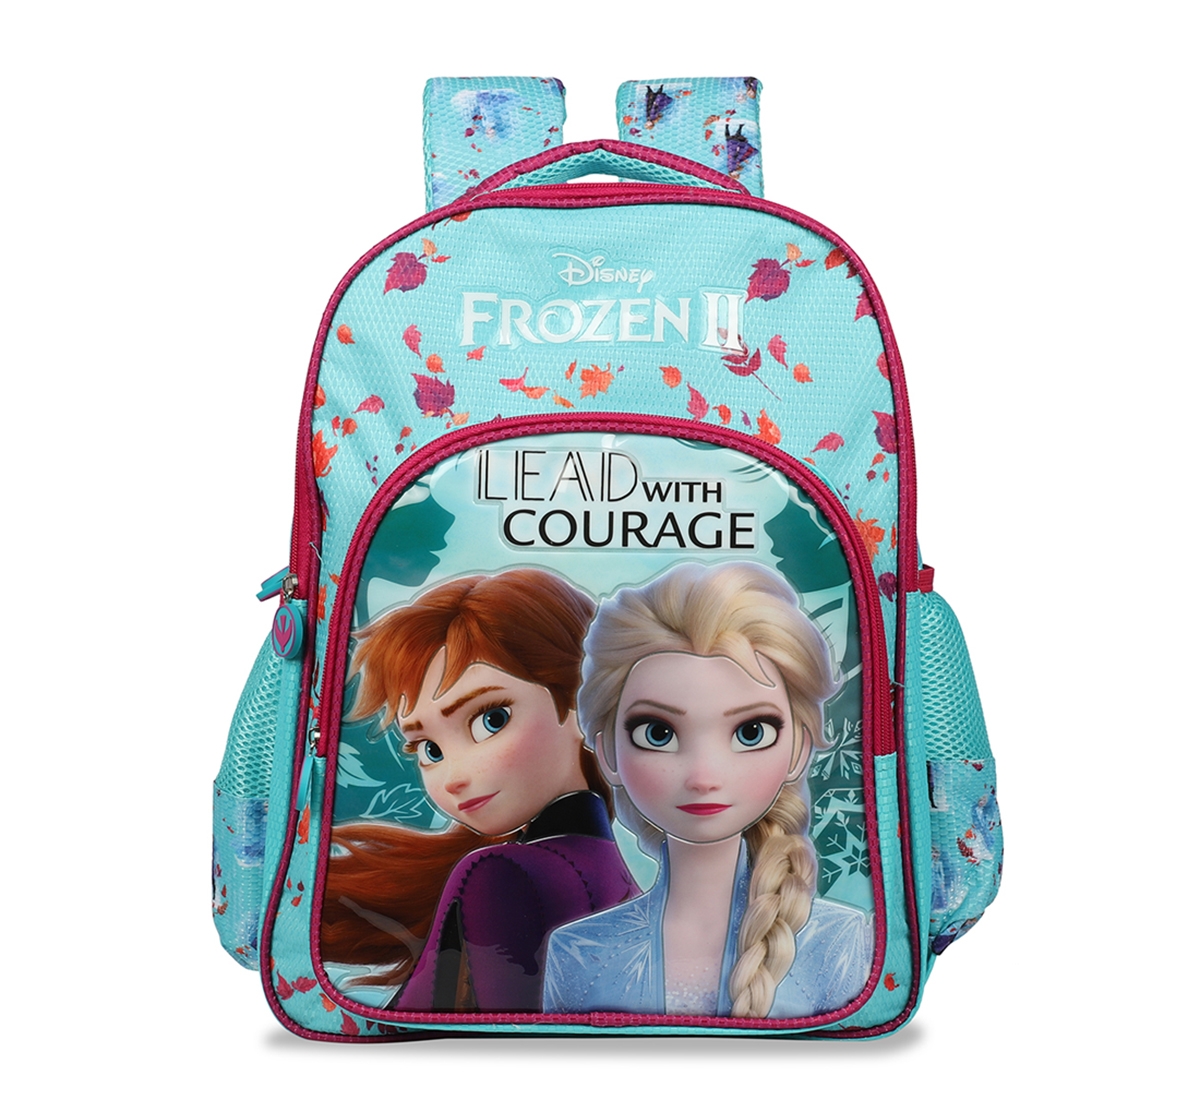 DISNEY | Disney Frozen2 Lead With Courage School Bag 46 Cm Bags for Girls age 10Y+ (Turquoise)